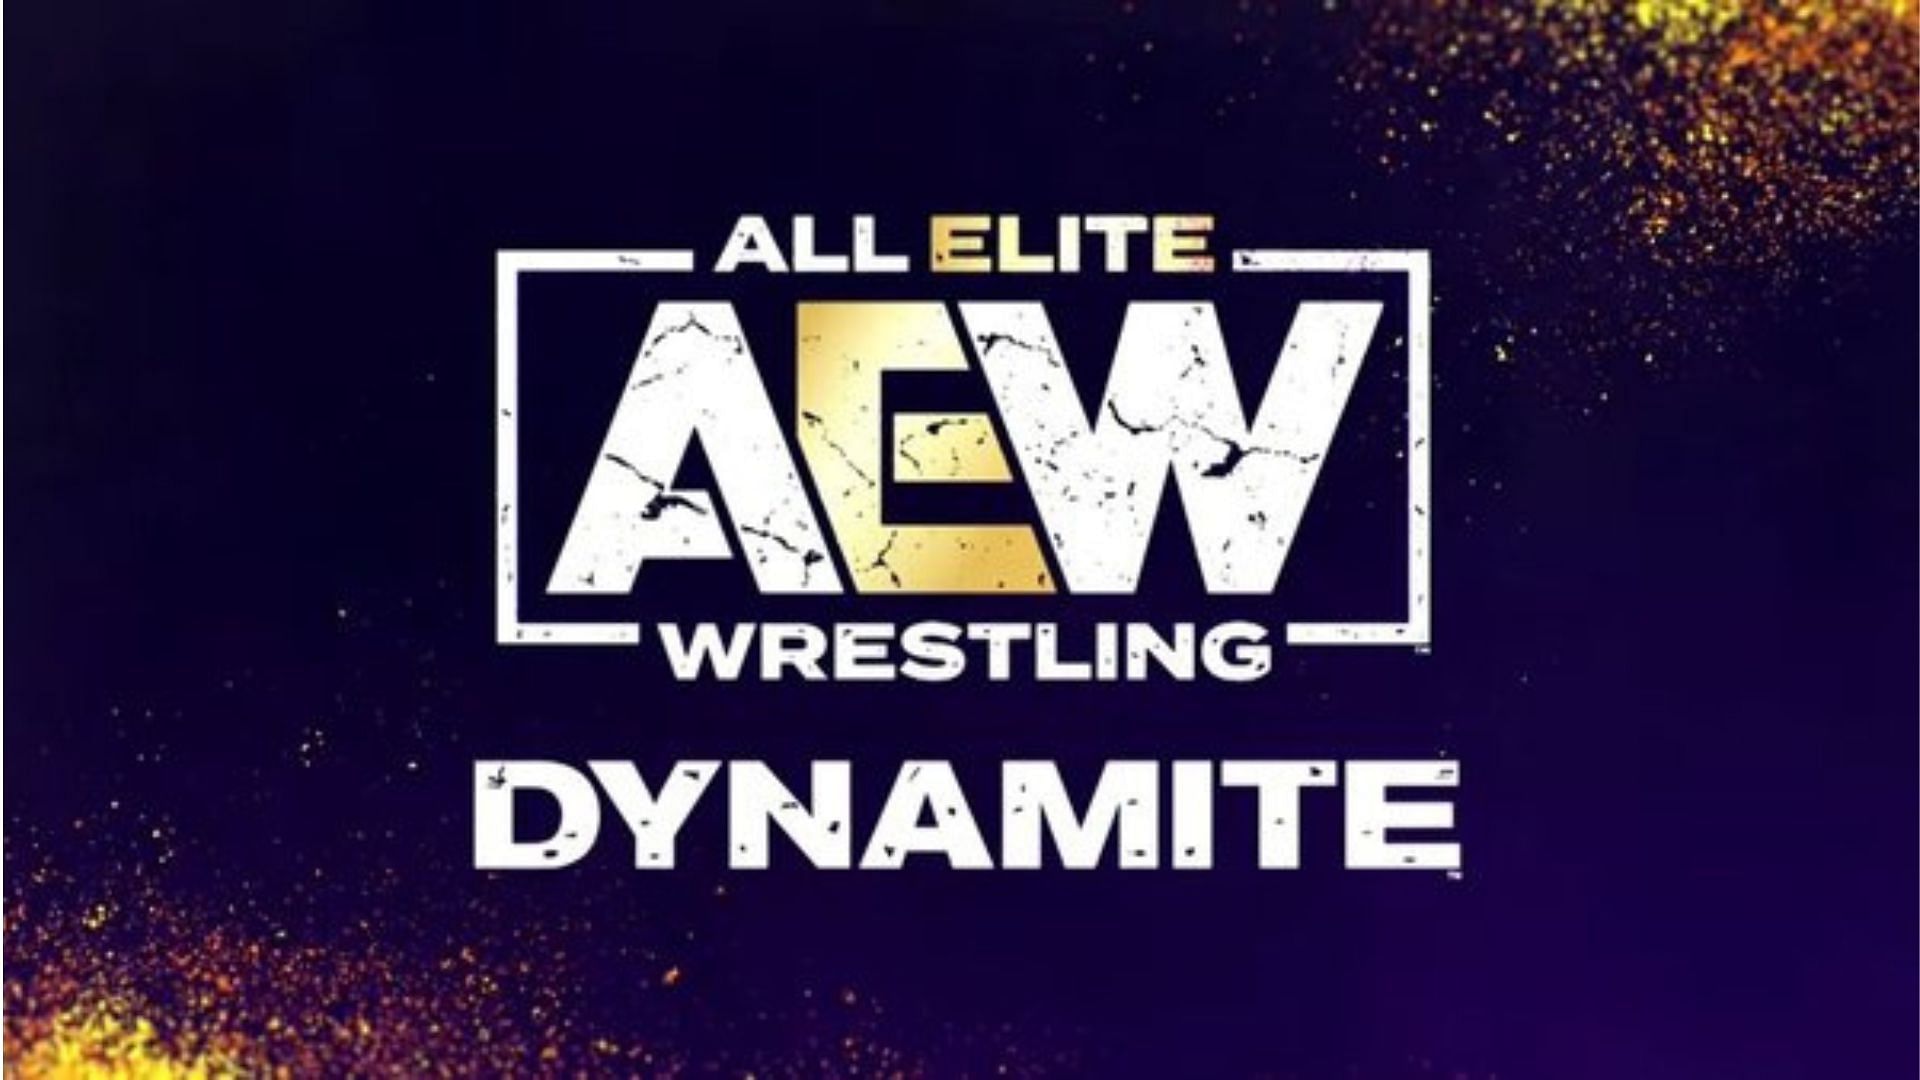 AEW Dynamite had an interesting opening this week